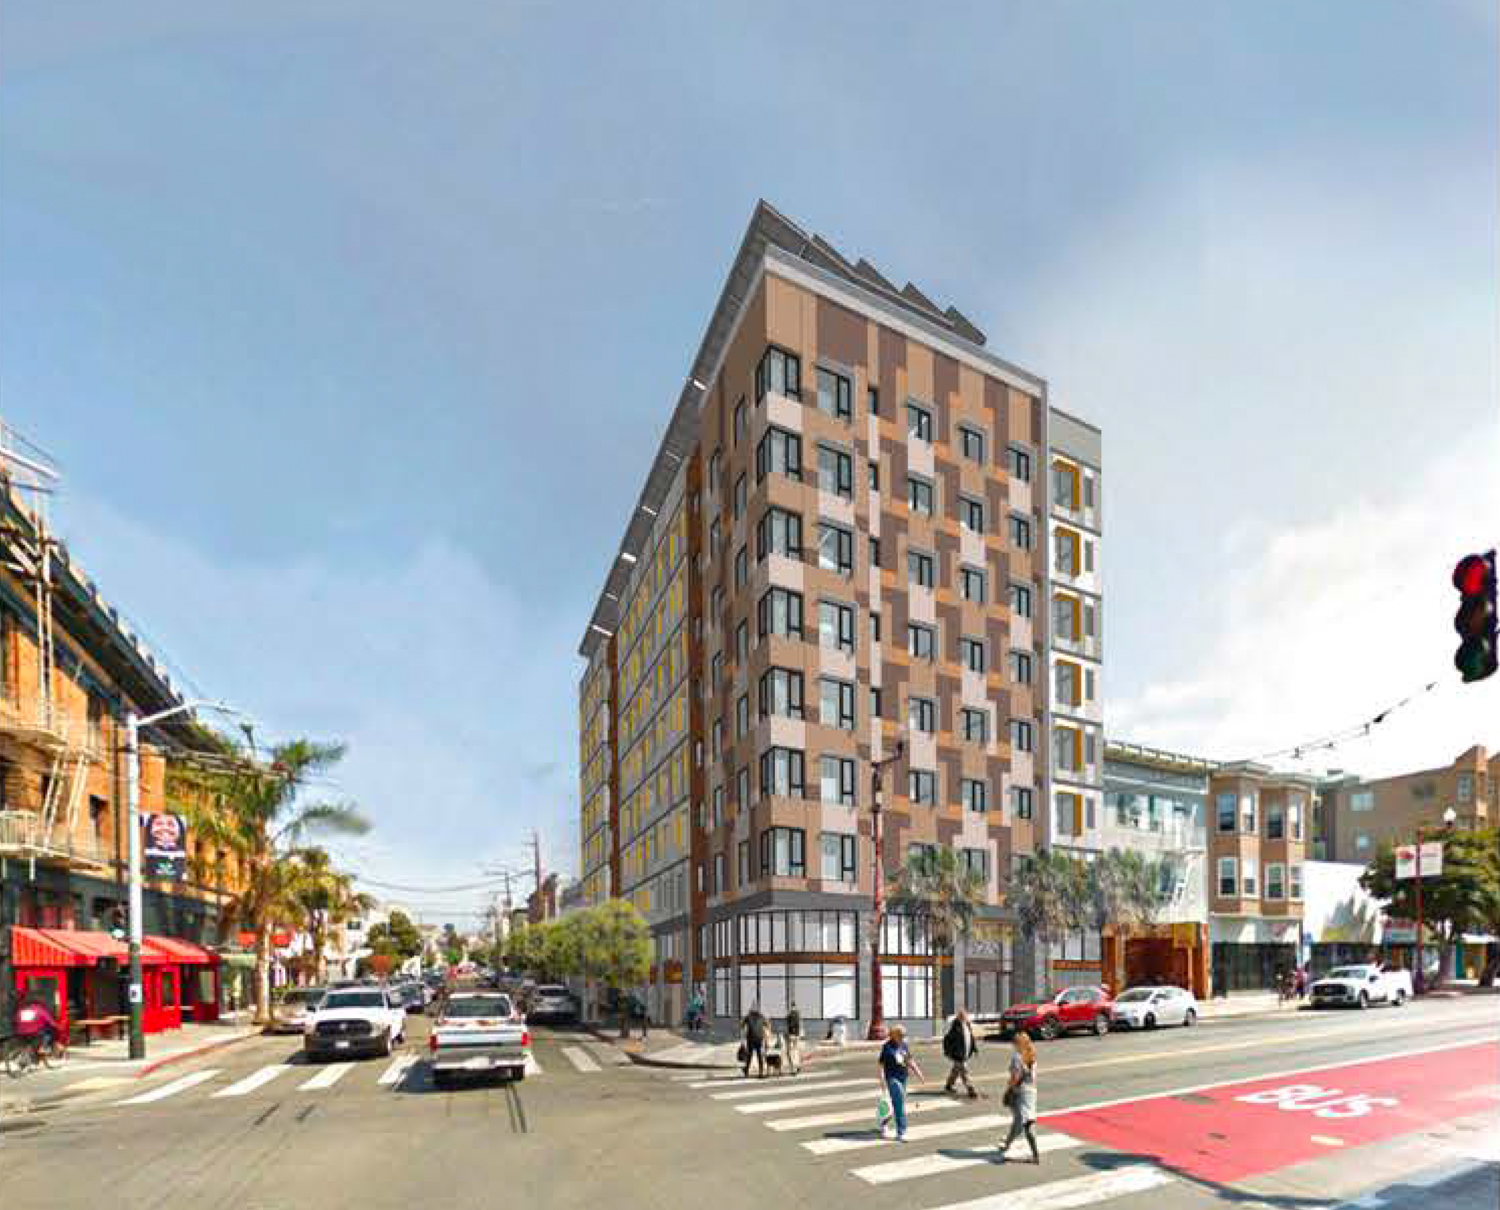 2205 Mission Street view at the intersection of 18th and Mission, rendering by Gelfand Partners Architects